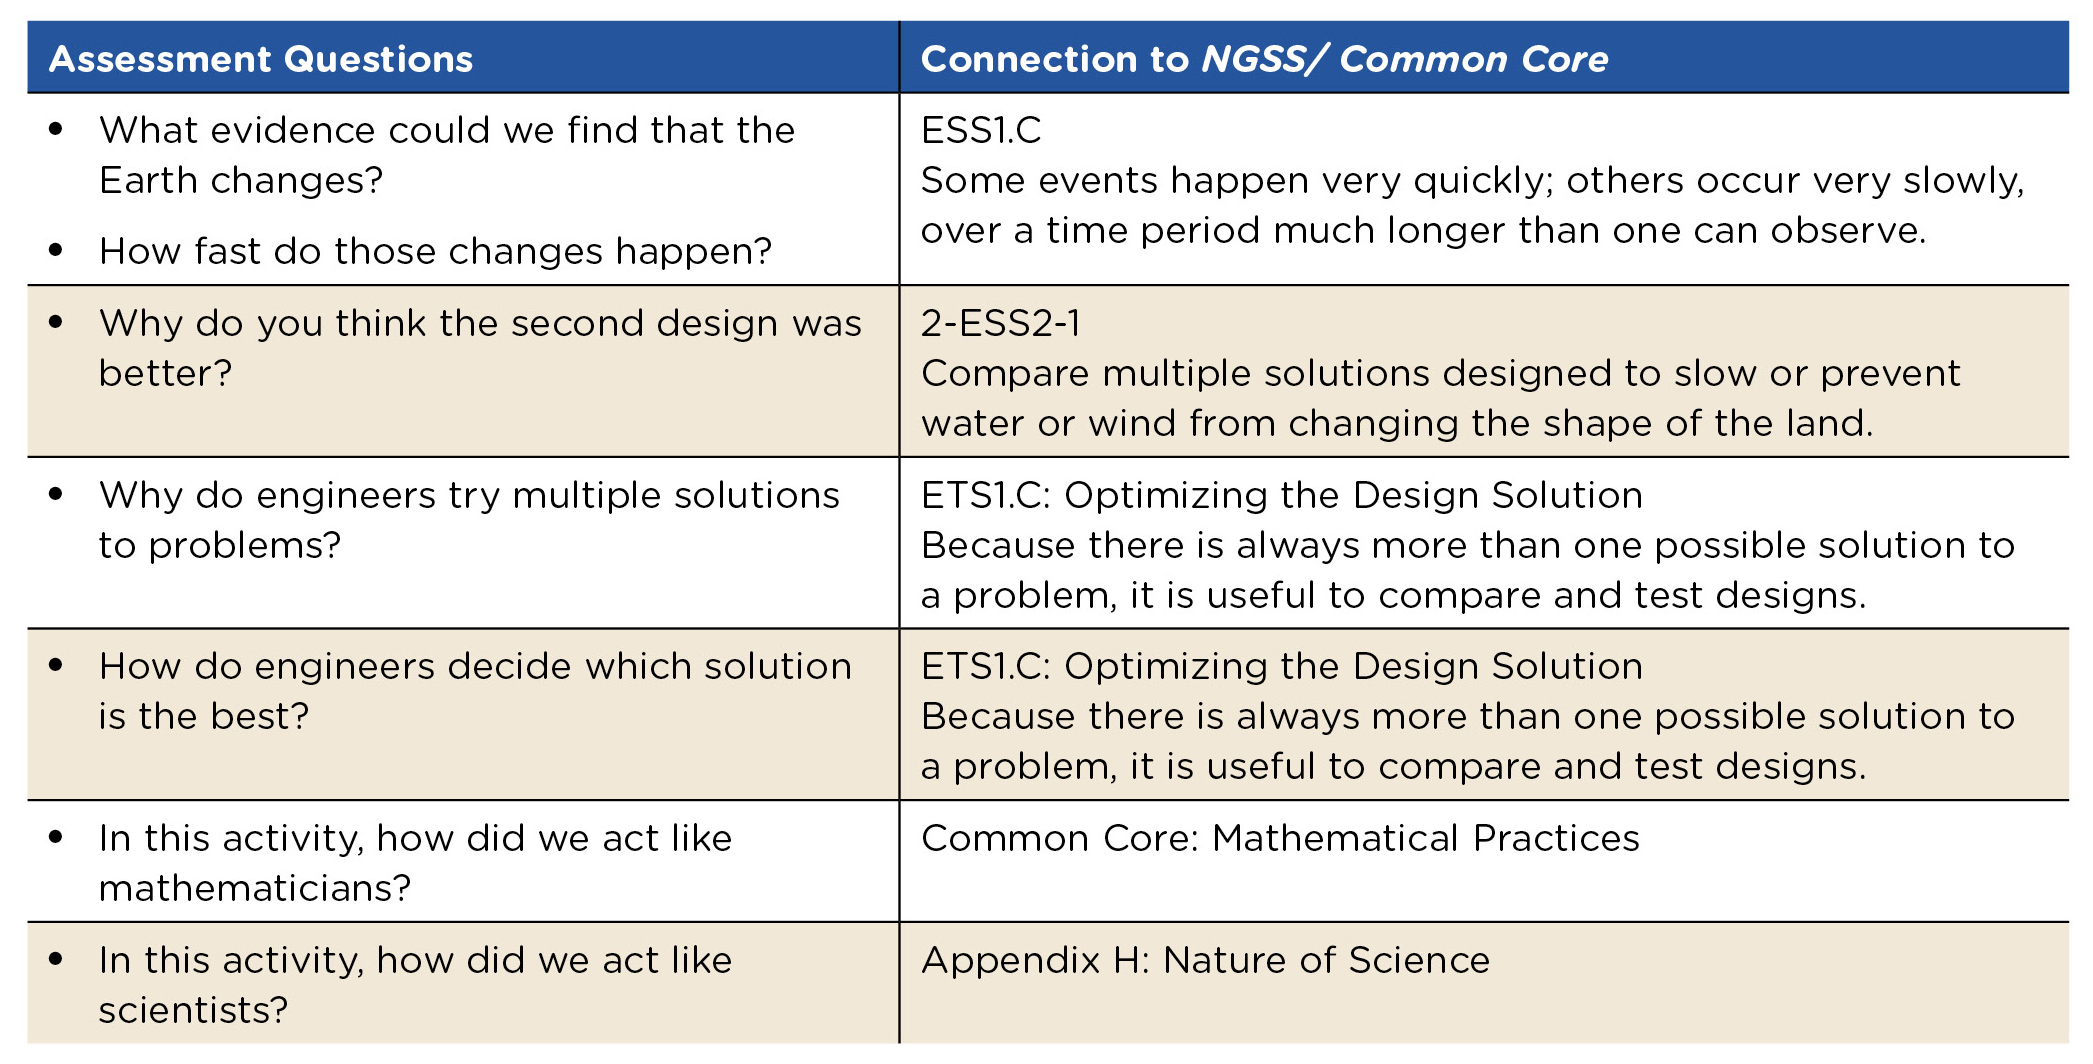 Alignment to NGSS/Common Core.